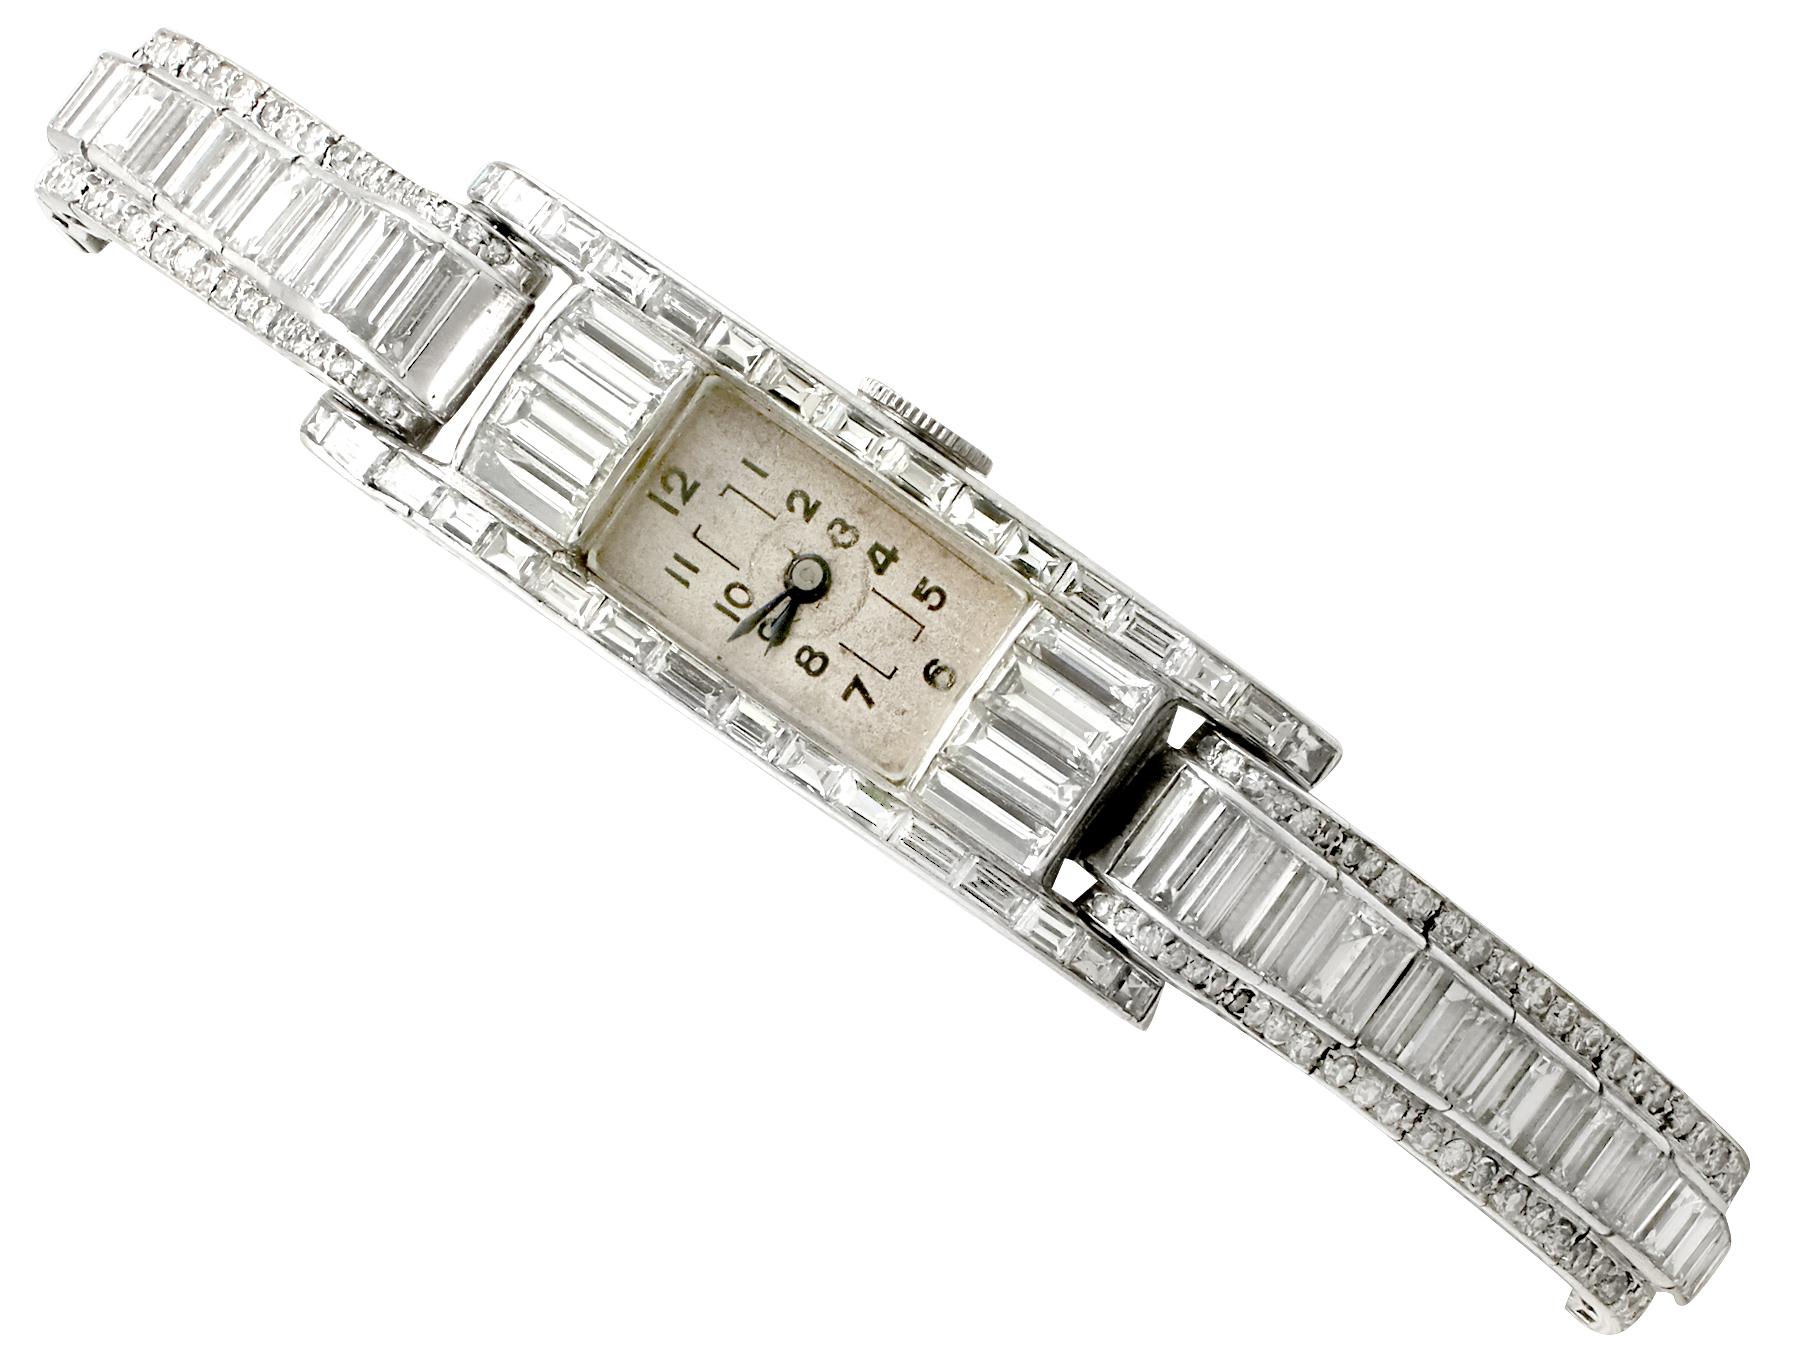 This stunning vintage 1940s ladies watch has been crafted in platinum, with a bracelet style strap.

This ladies Art Deco style diamond wristwatch has a rectangular, off-white, aged face with simple black Arabic hour numerals, and is fitted with